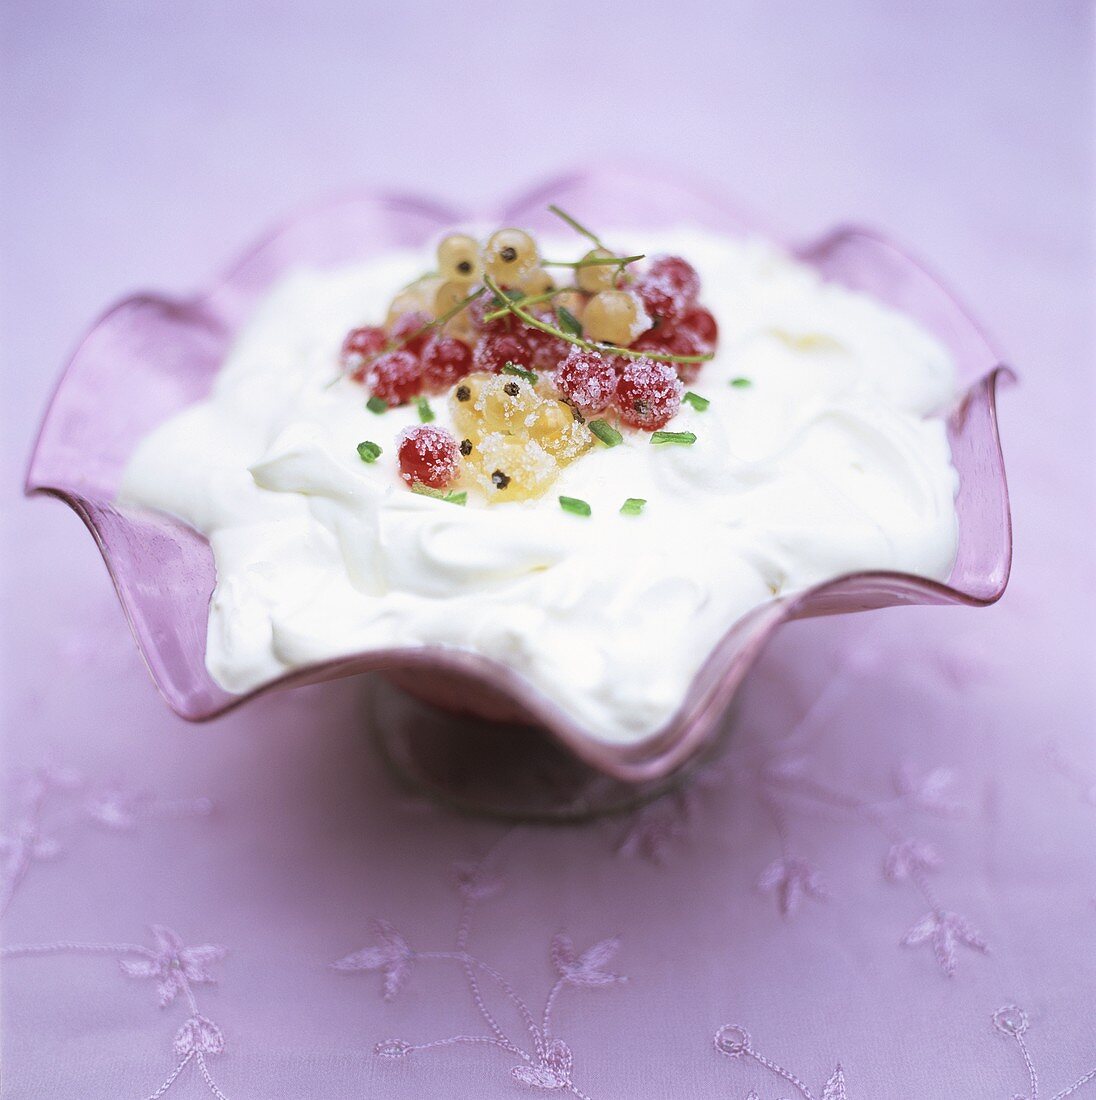 Berry brandy mousse as accompaniment to Christmas pudding